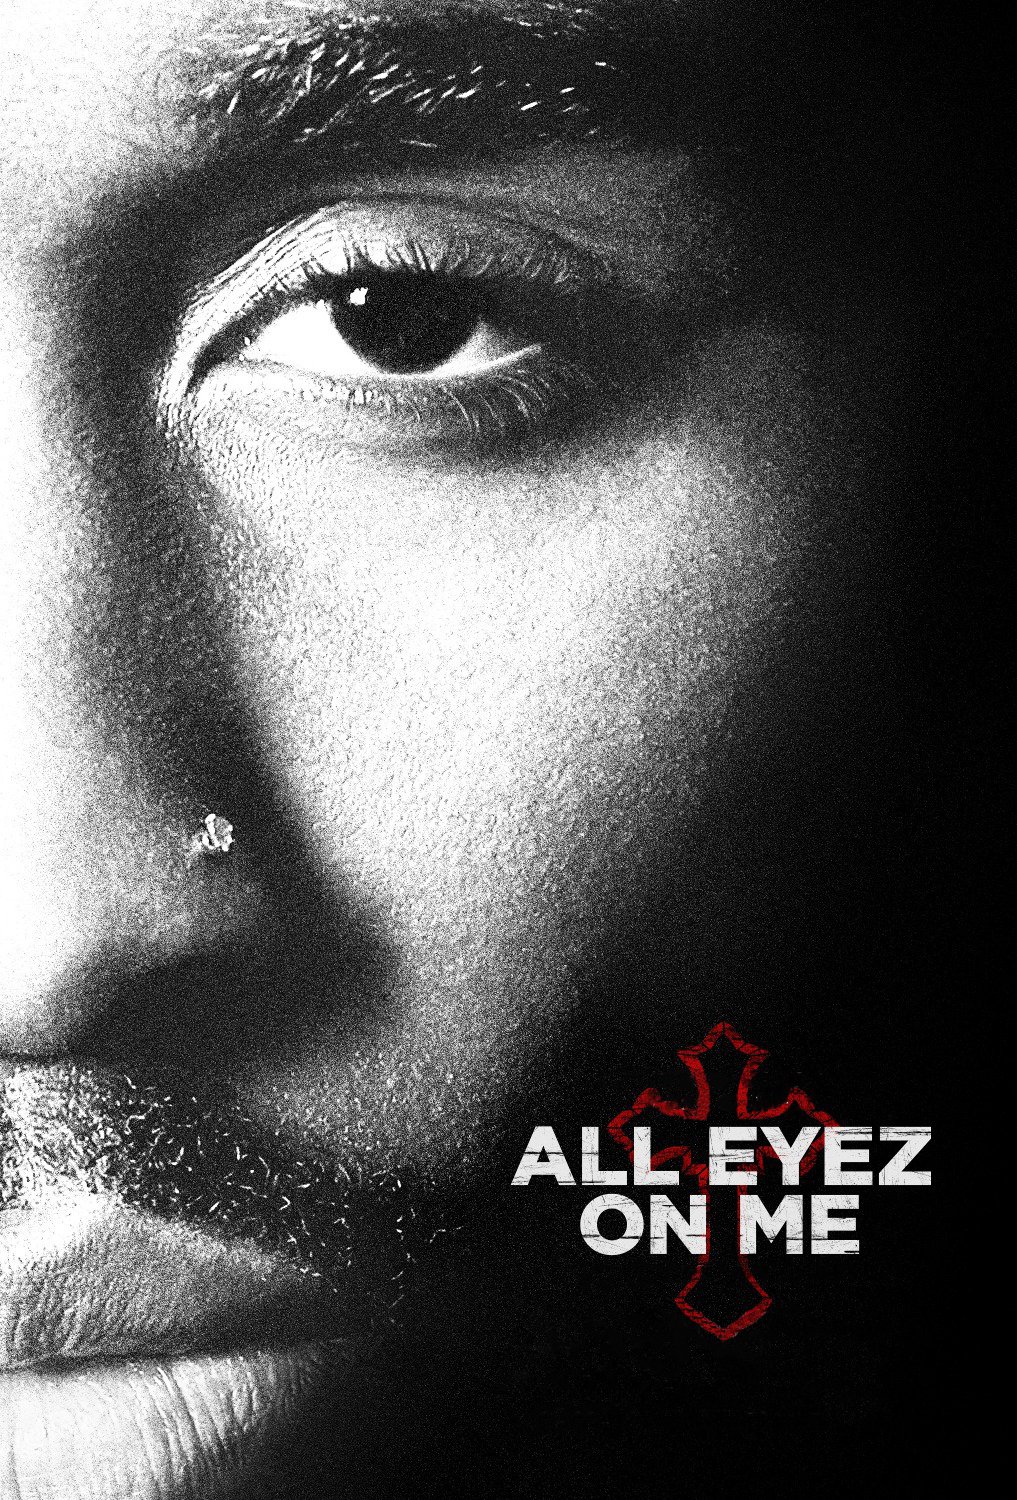 Poster for the movie "All Eyez on Me"